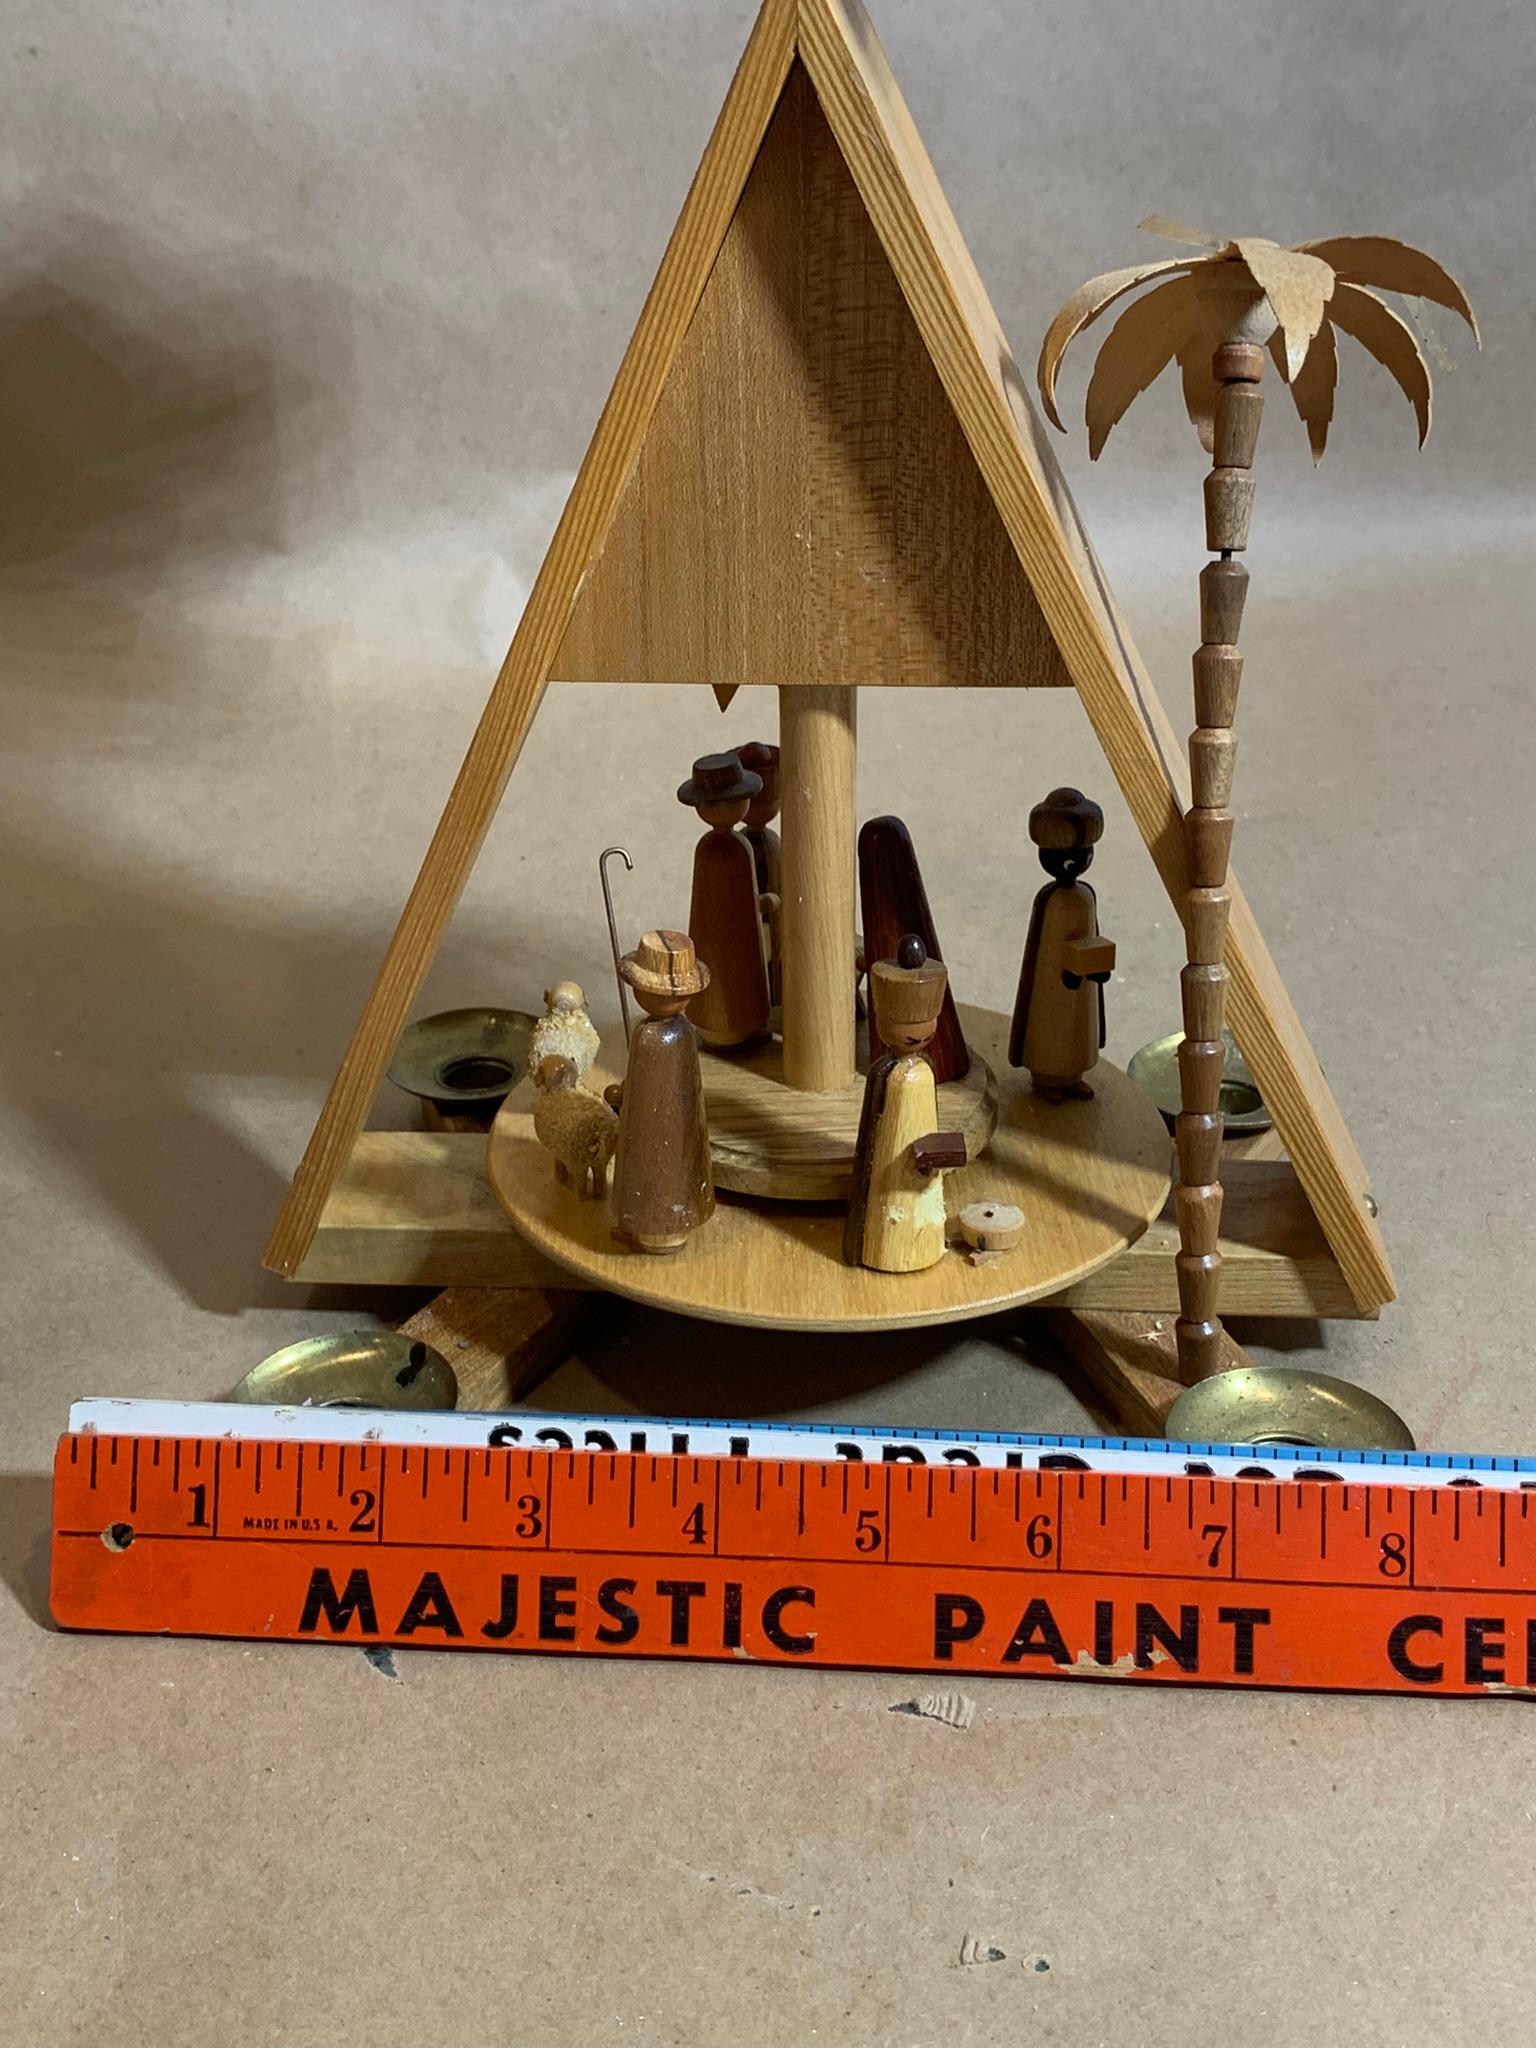 Vintage Plastic Lazarus Ornaments & Vintage Christmas Wooden Windmill with Nativity Scene